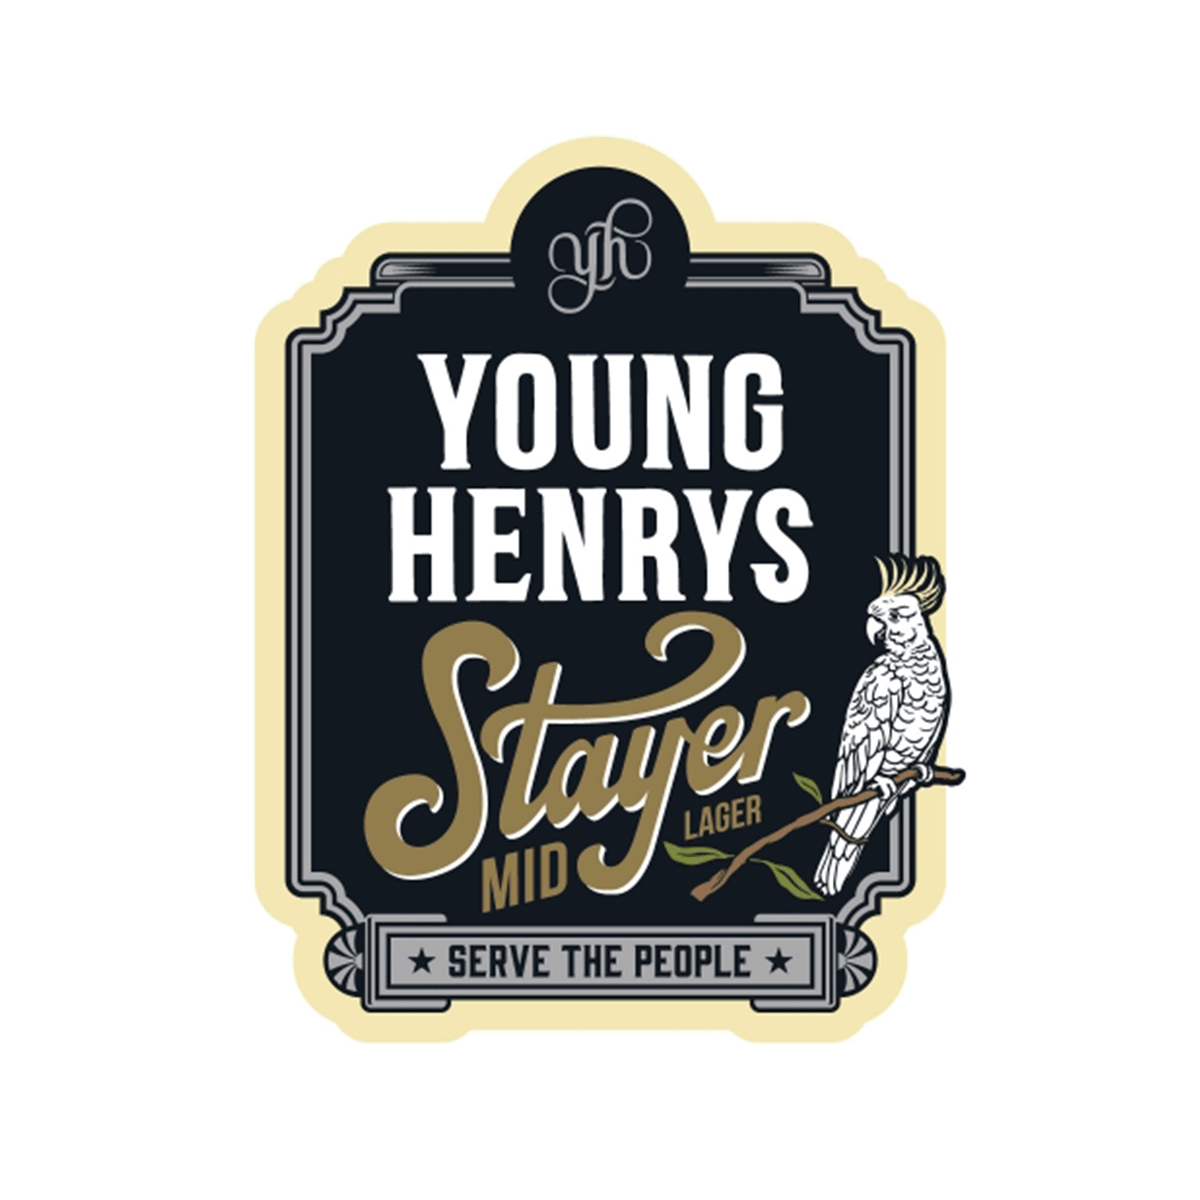 Young Henrys The Stayer Mid-strength